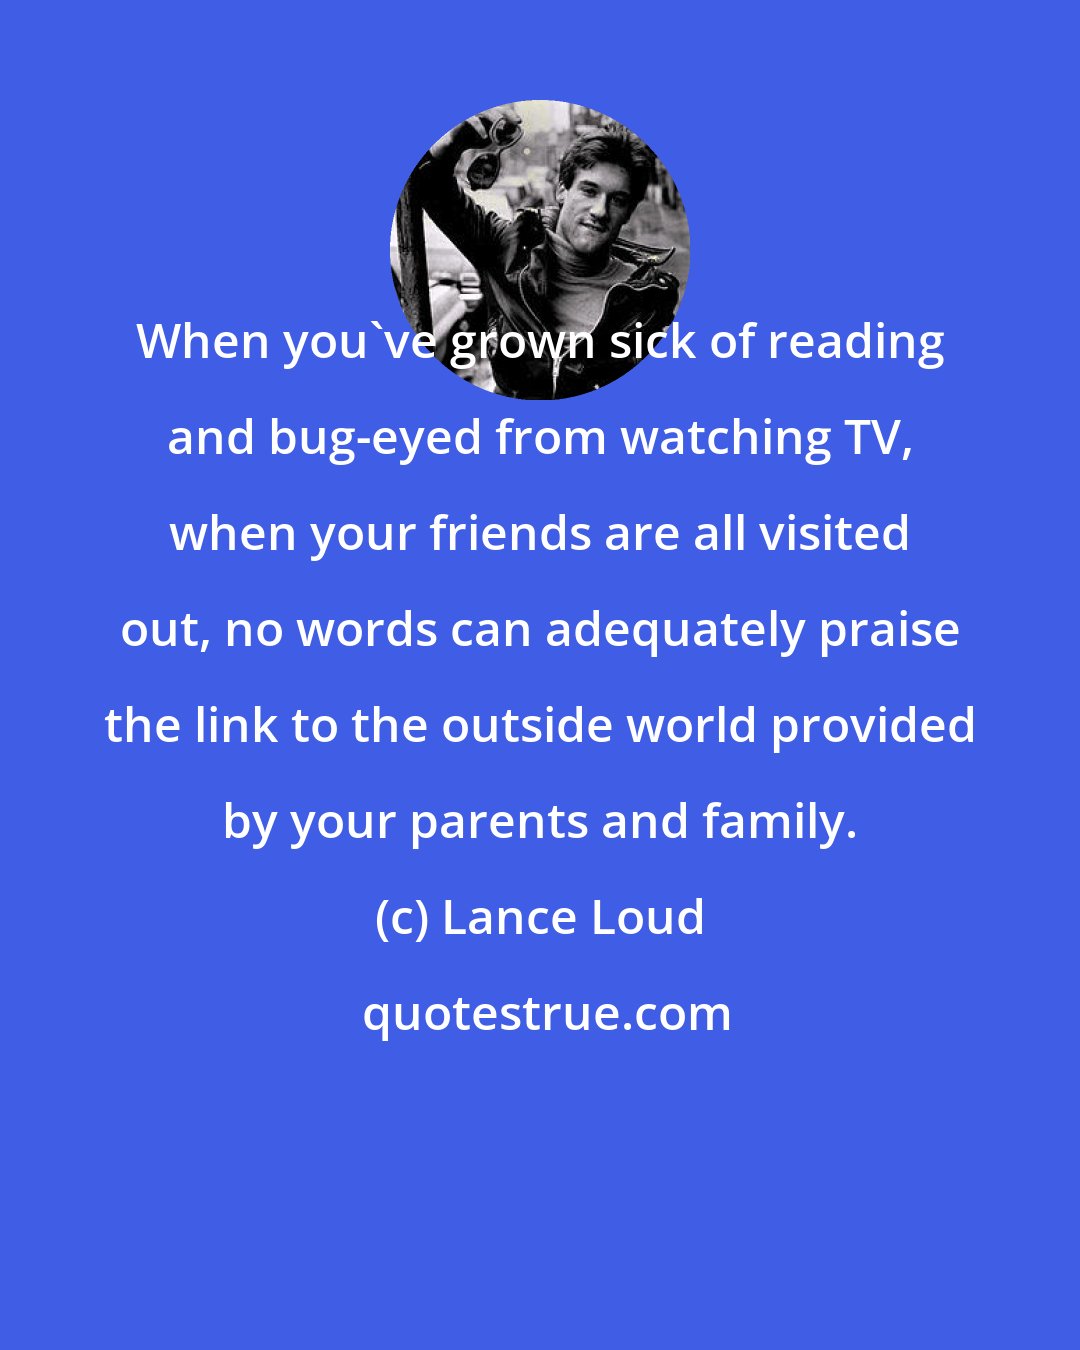 Lance Loud: When you've grown sick of reading and bug-eyed from watching TV, when your friends are all visited out, no words can adequately praise the link to the outside world provided by your parents and family.